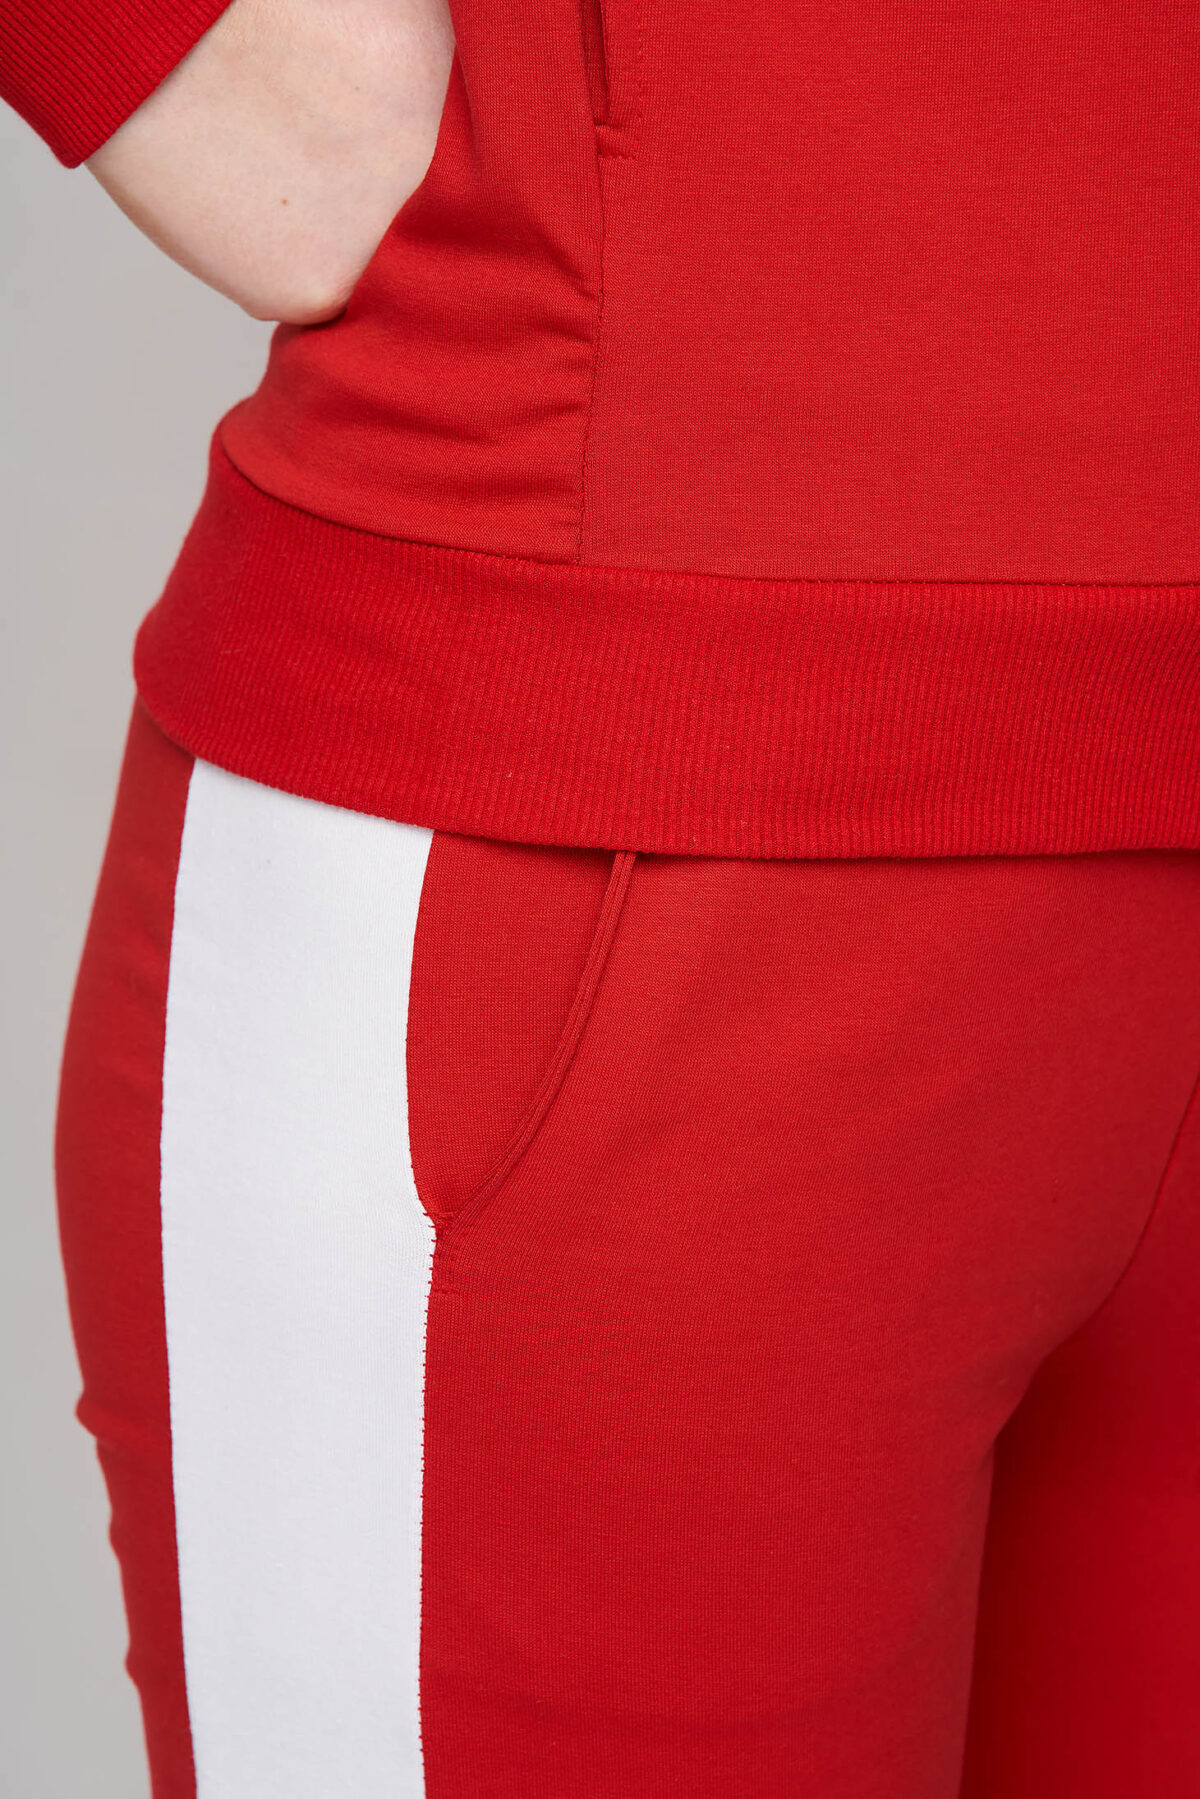 Red Sporty Set Slightly Elastic Cotton With Tented Cut With Medium Waist With Elastic Waist